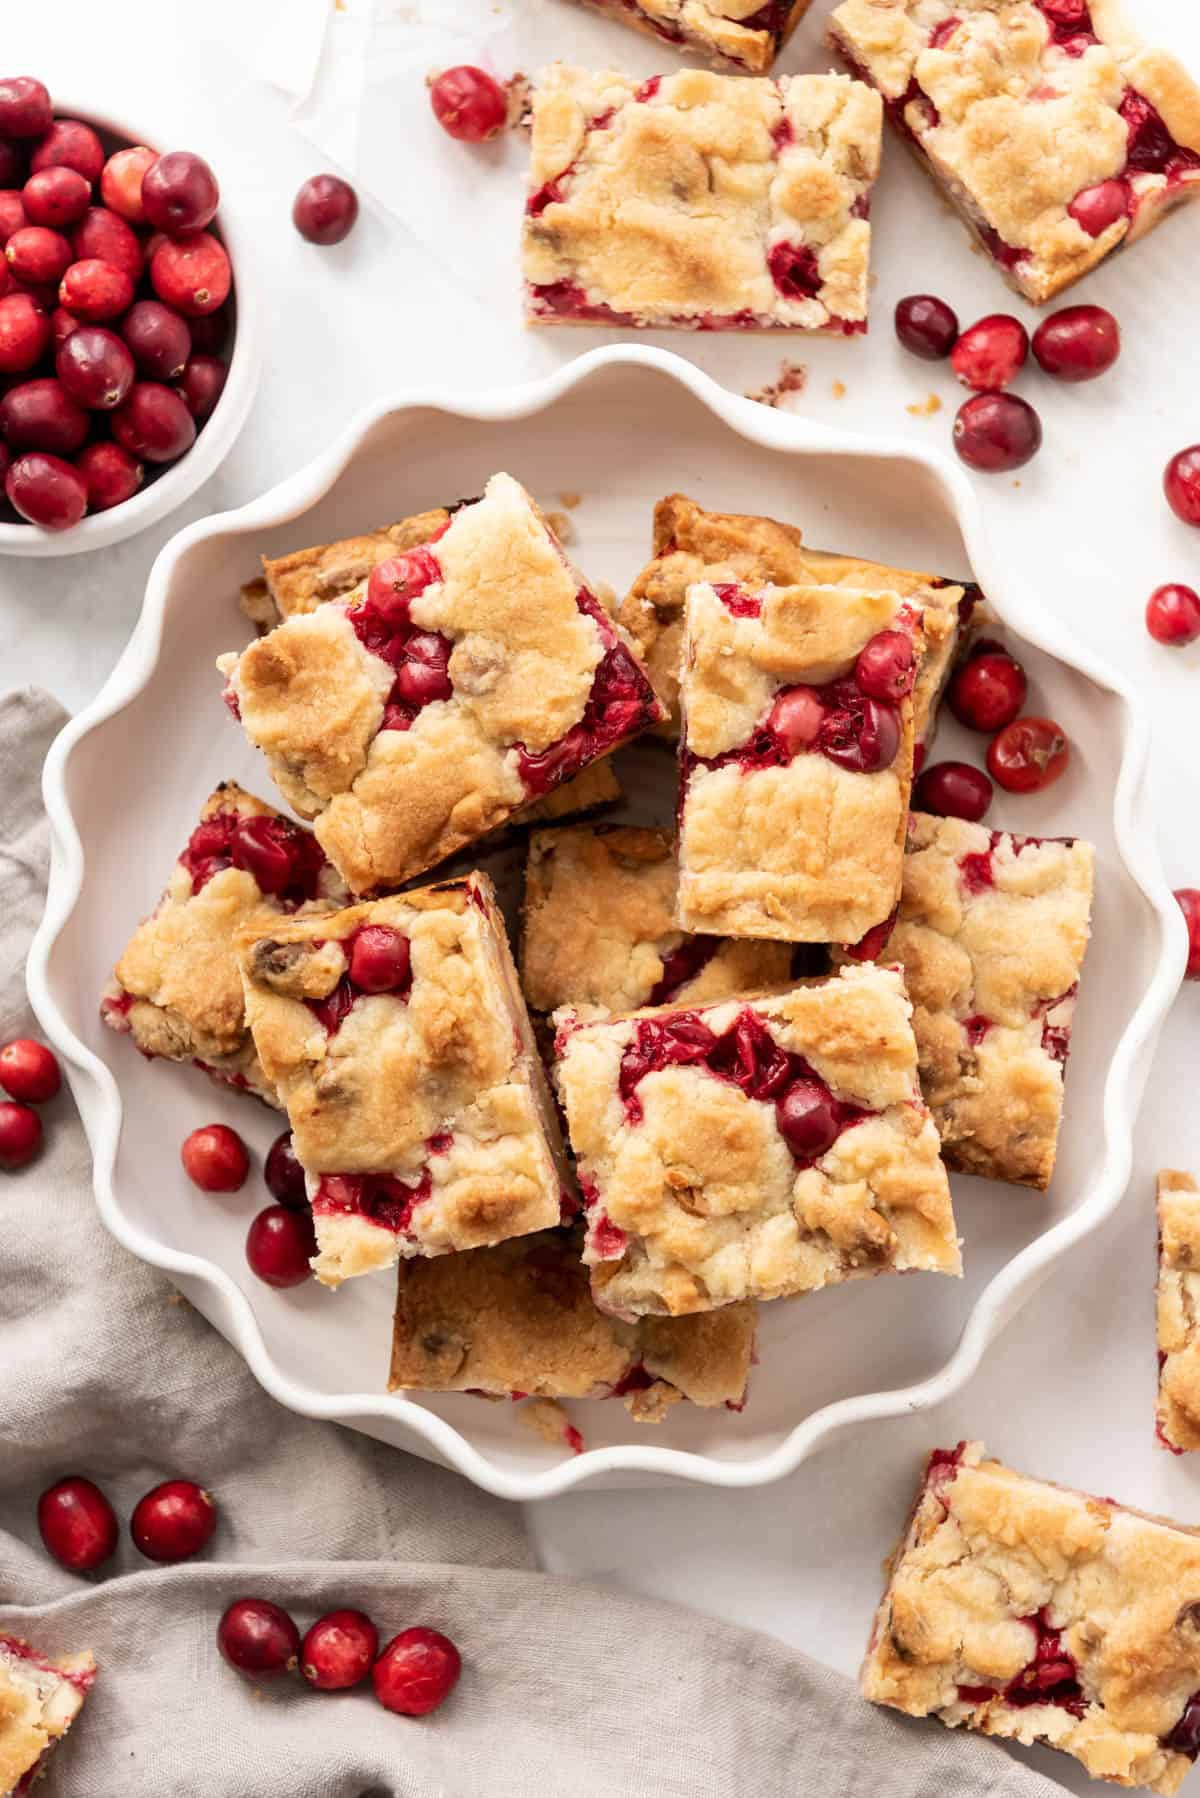 Our Cranberry Products are Made for Holiday Meals